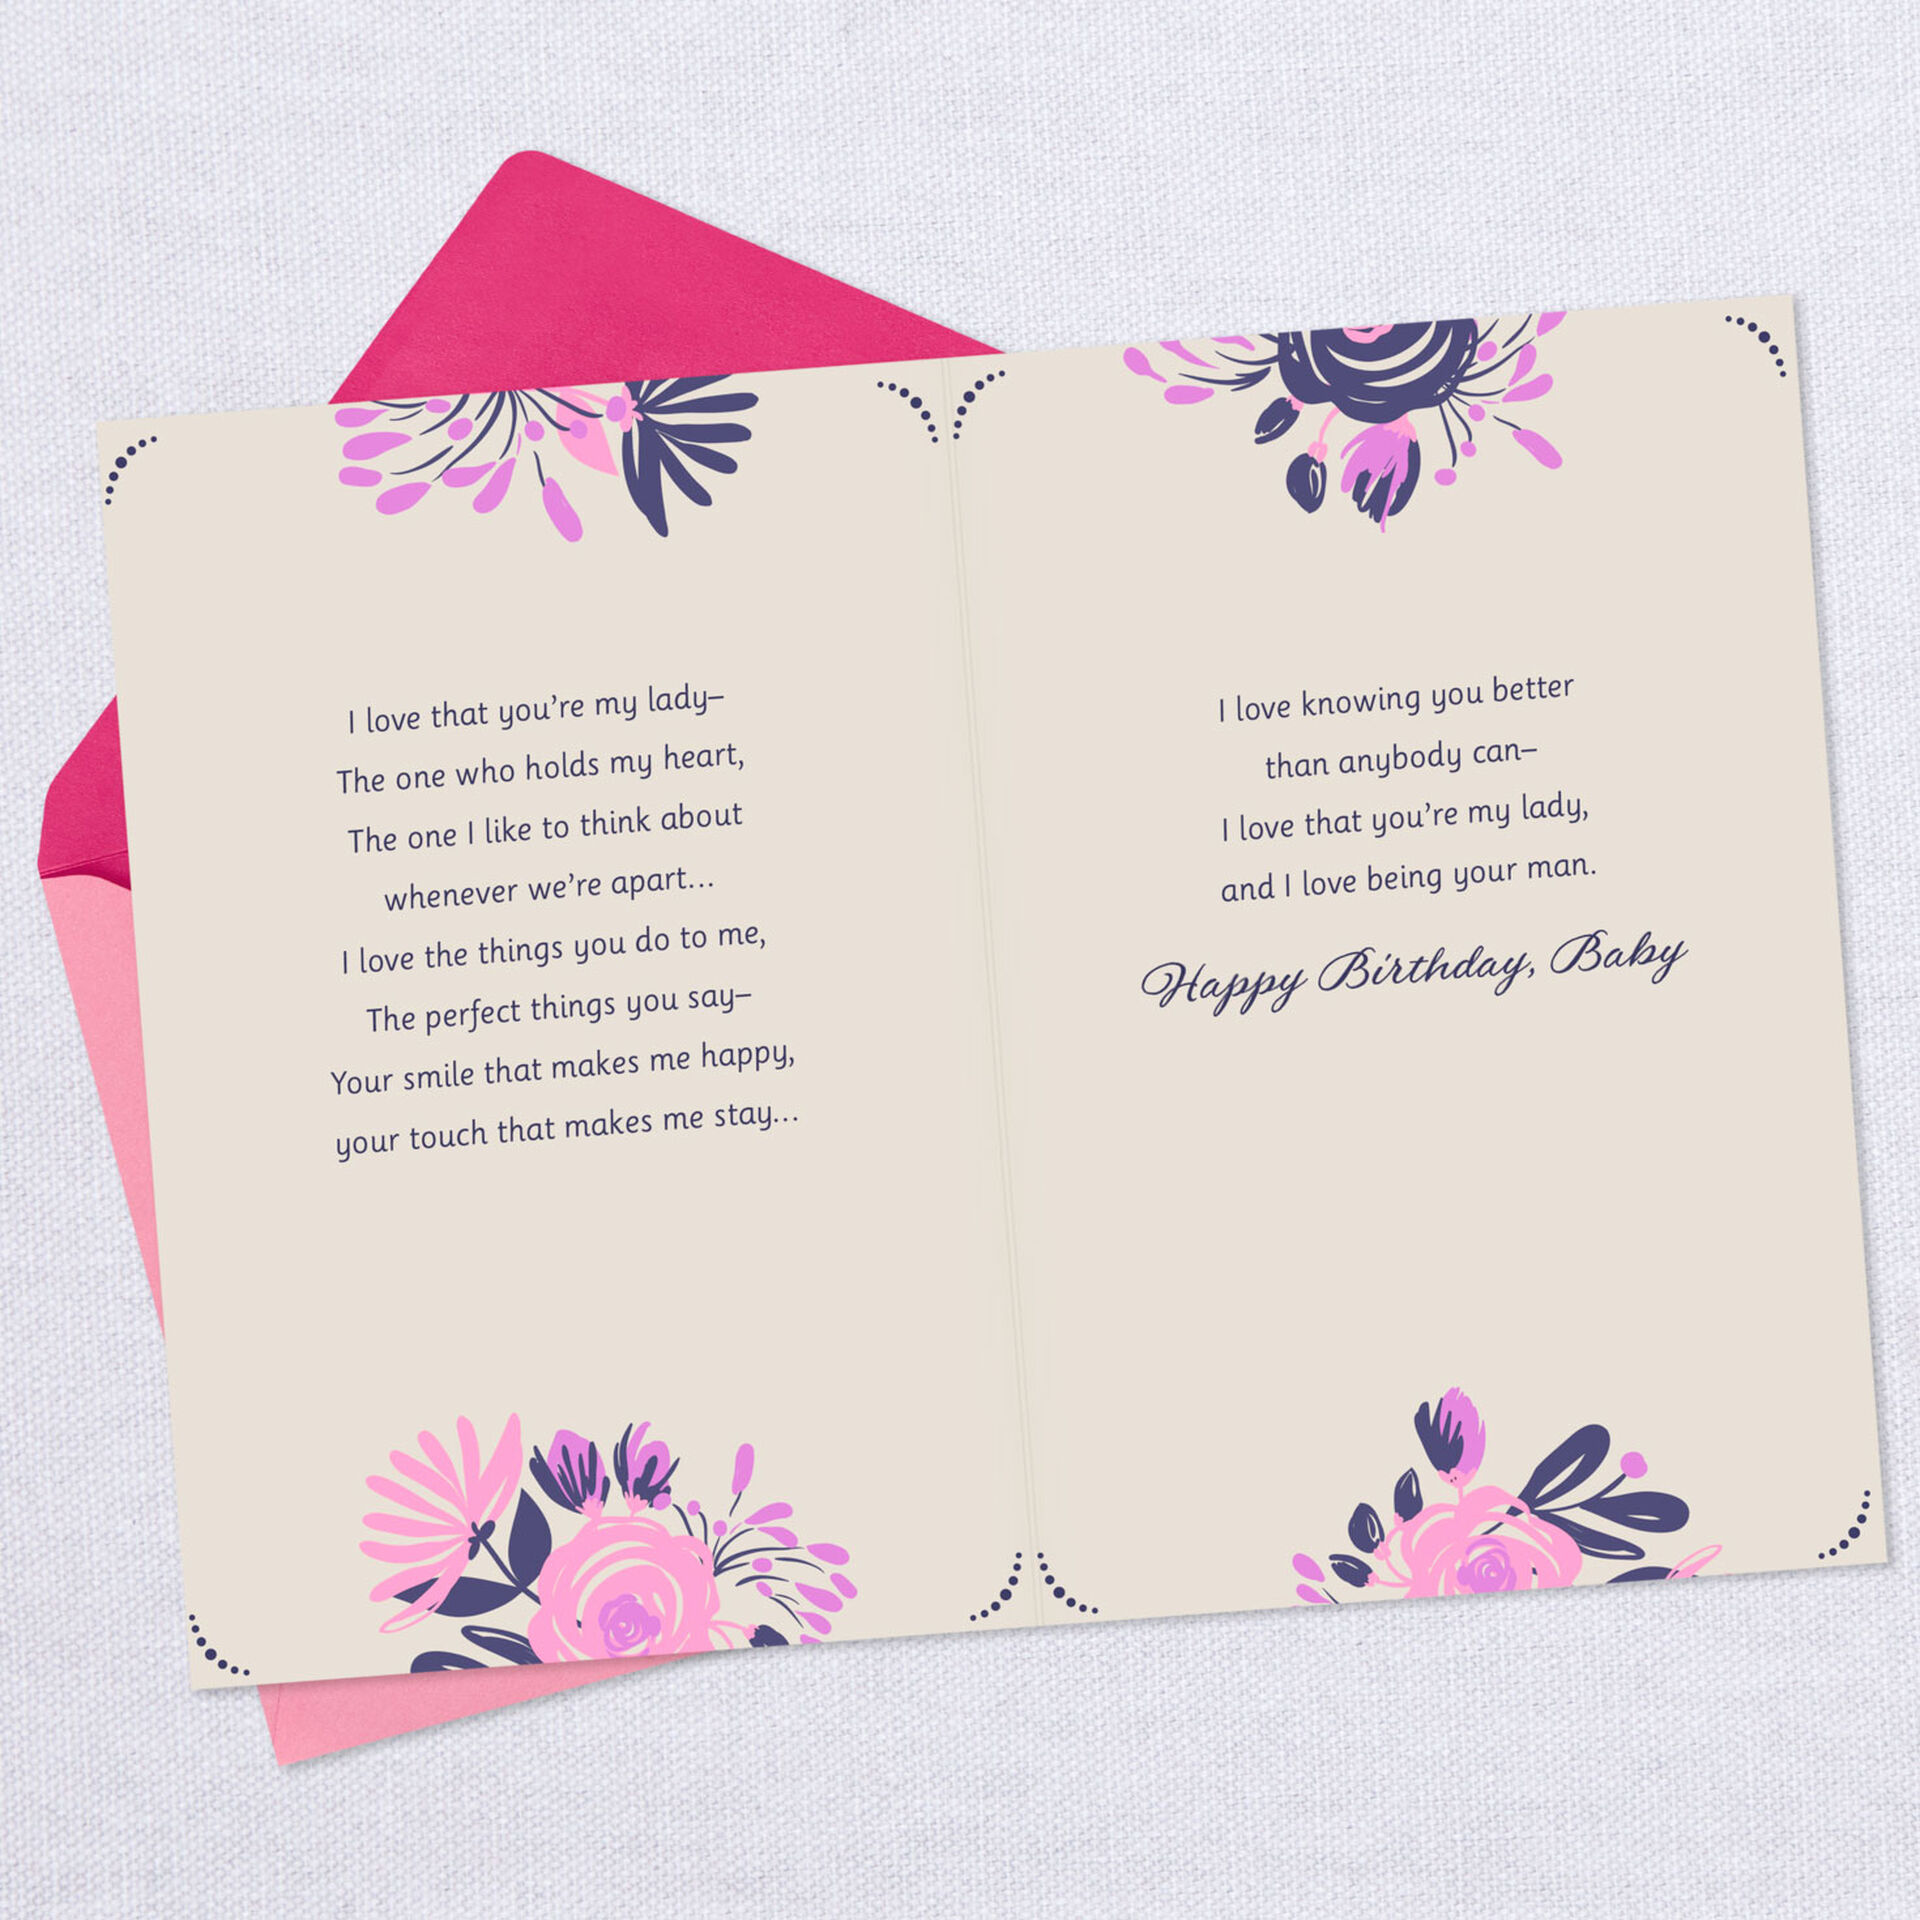 I-Love-That-Youre-My-Lady-Birthday-Card_299MHB1763_04